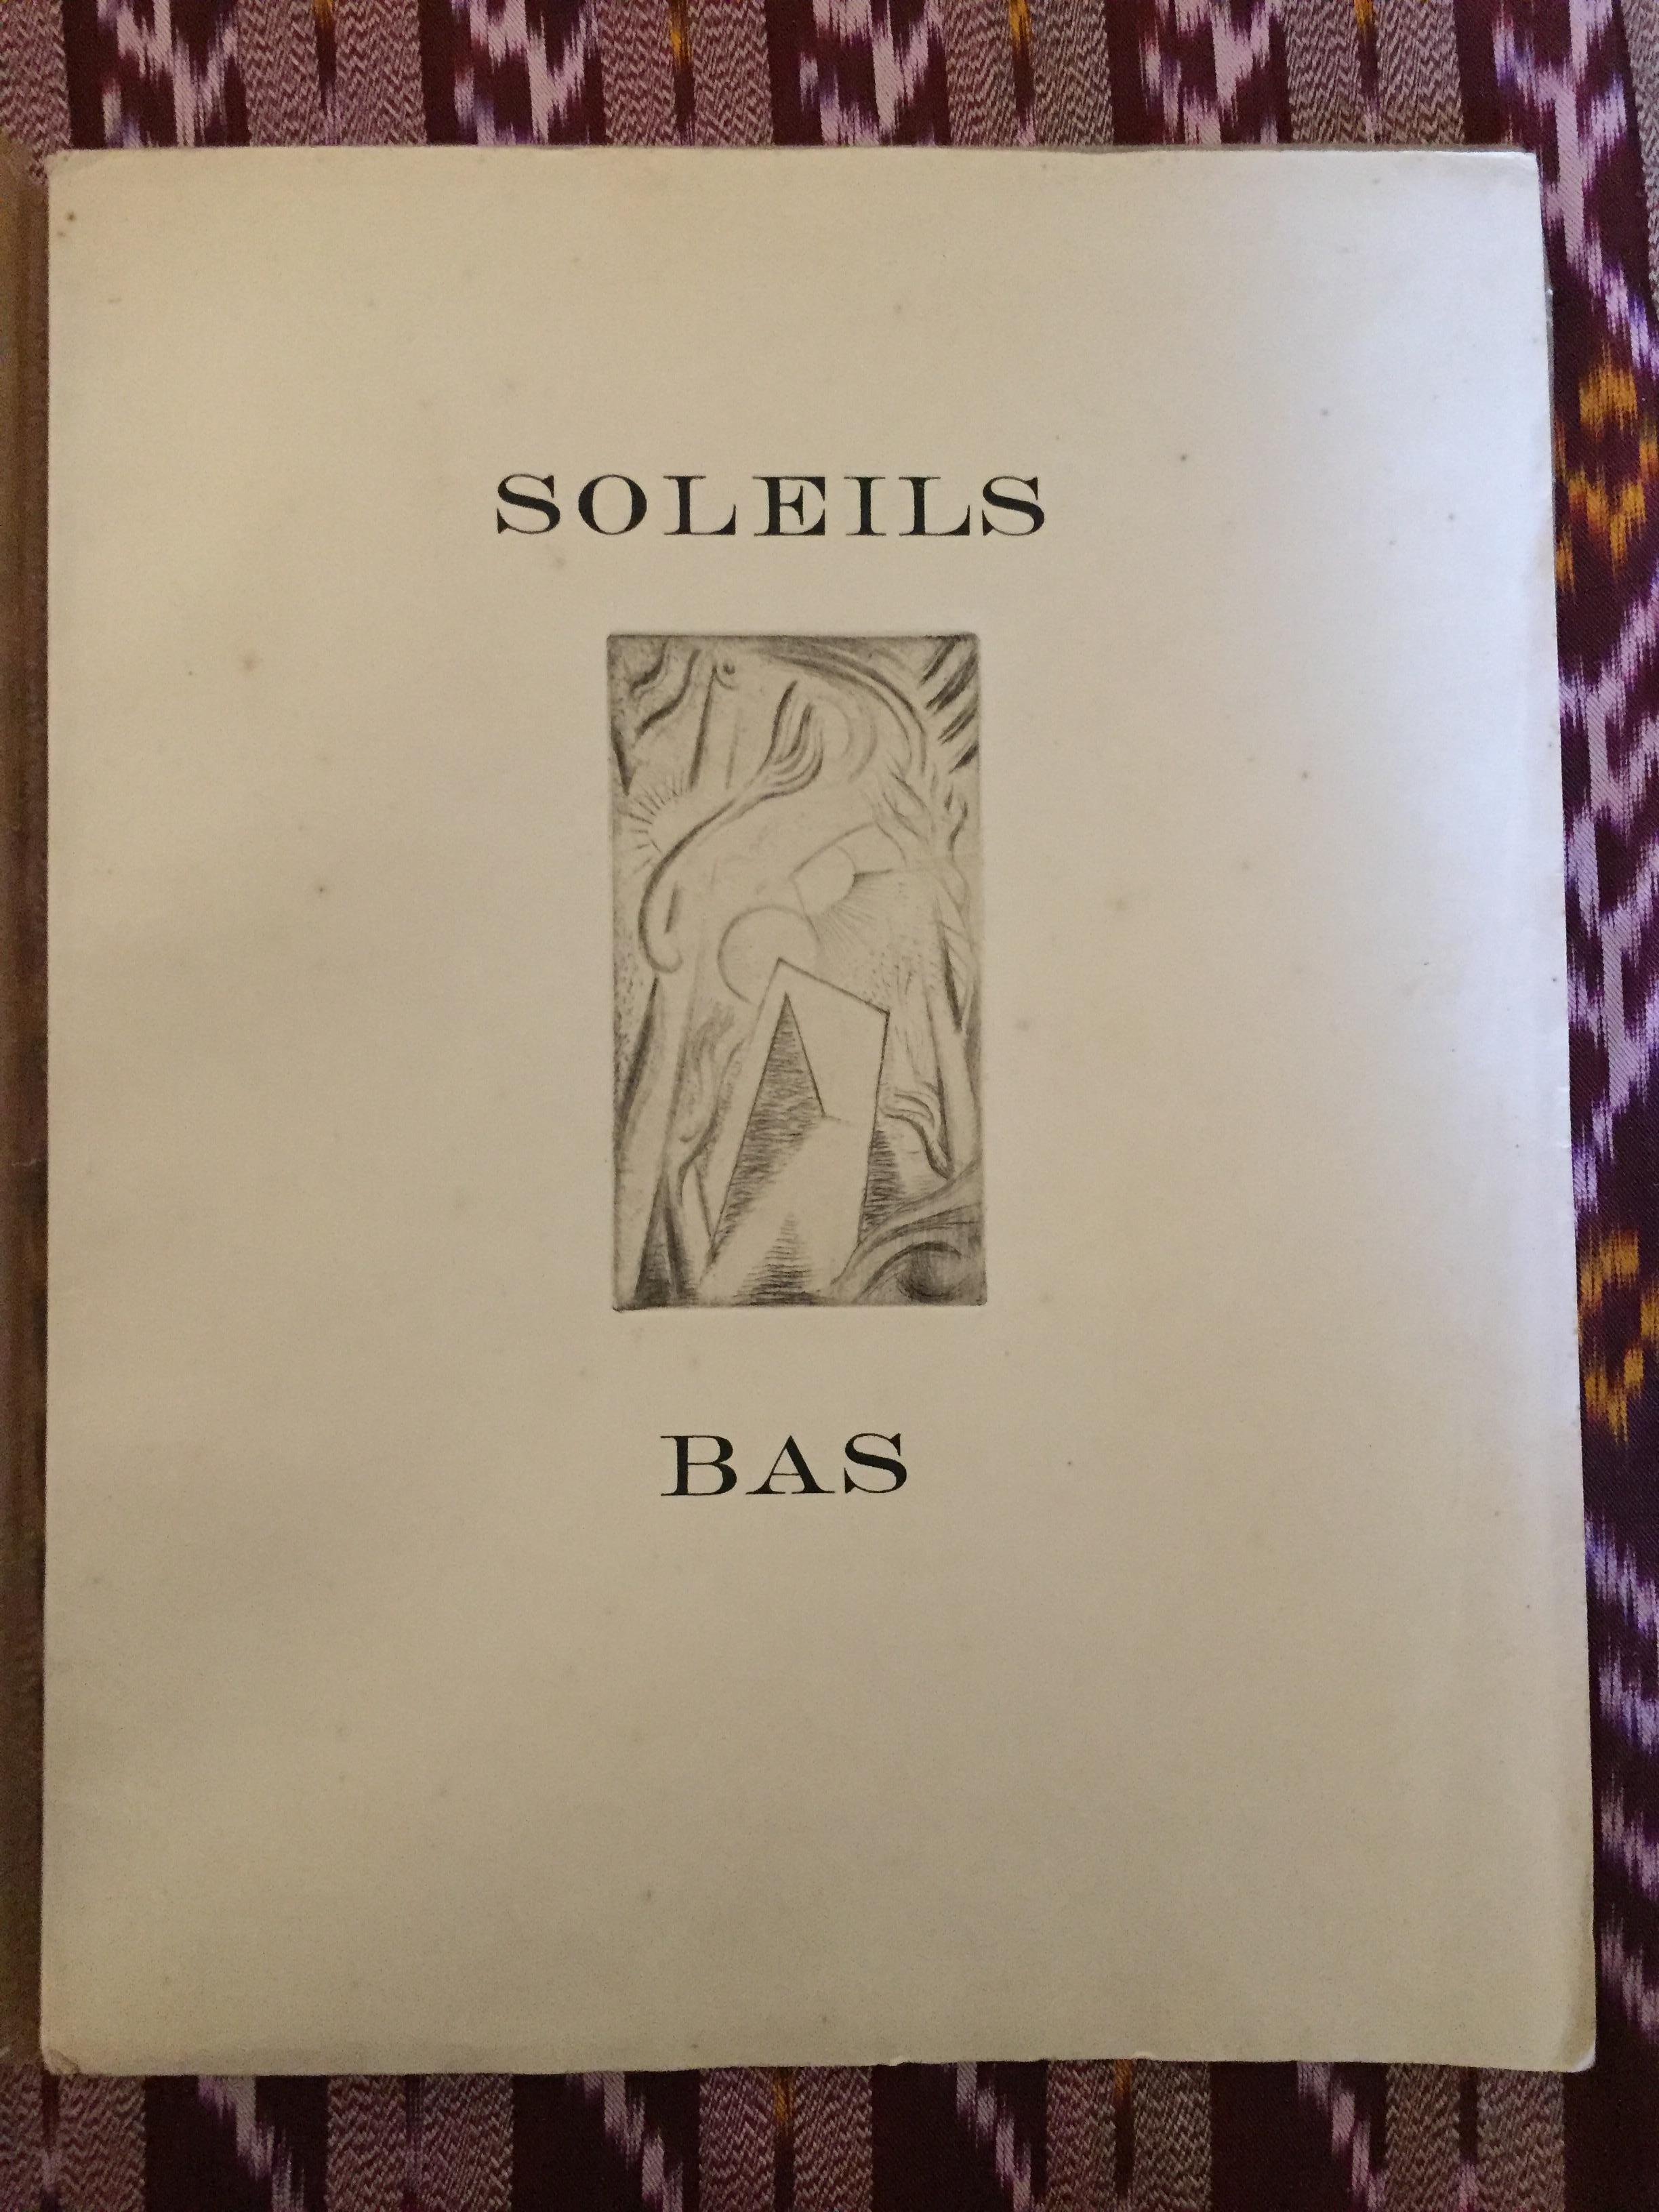 Soleil bas - Rare Illustrated Book by André Masson - 1924 - Art by André Masson, Georges Limbour